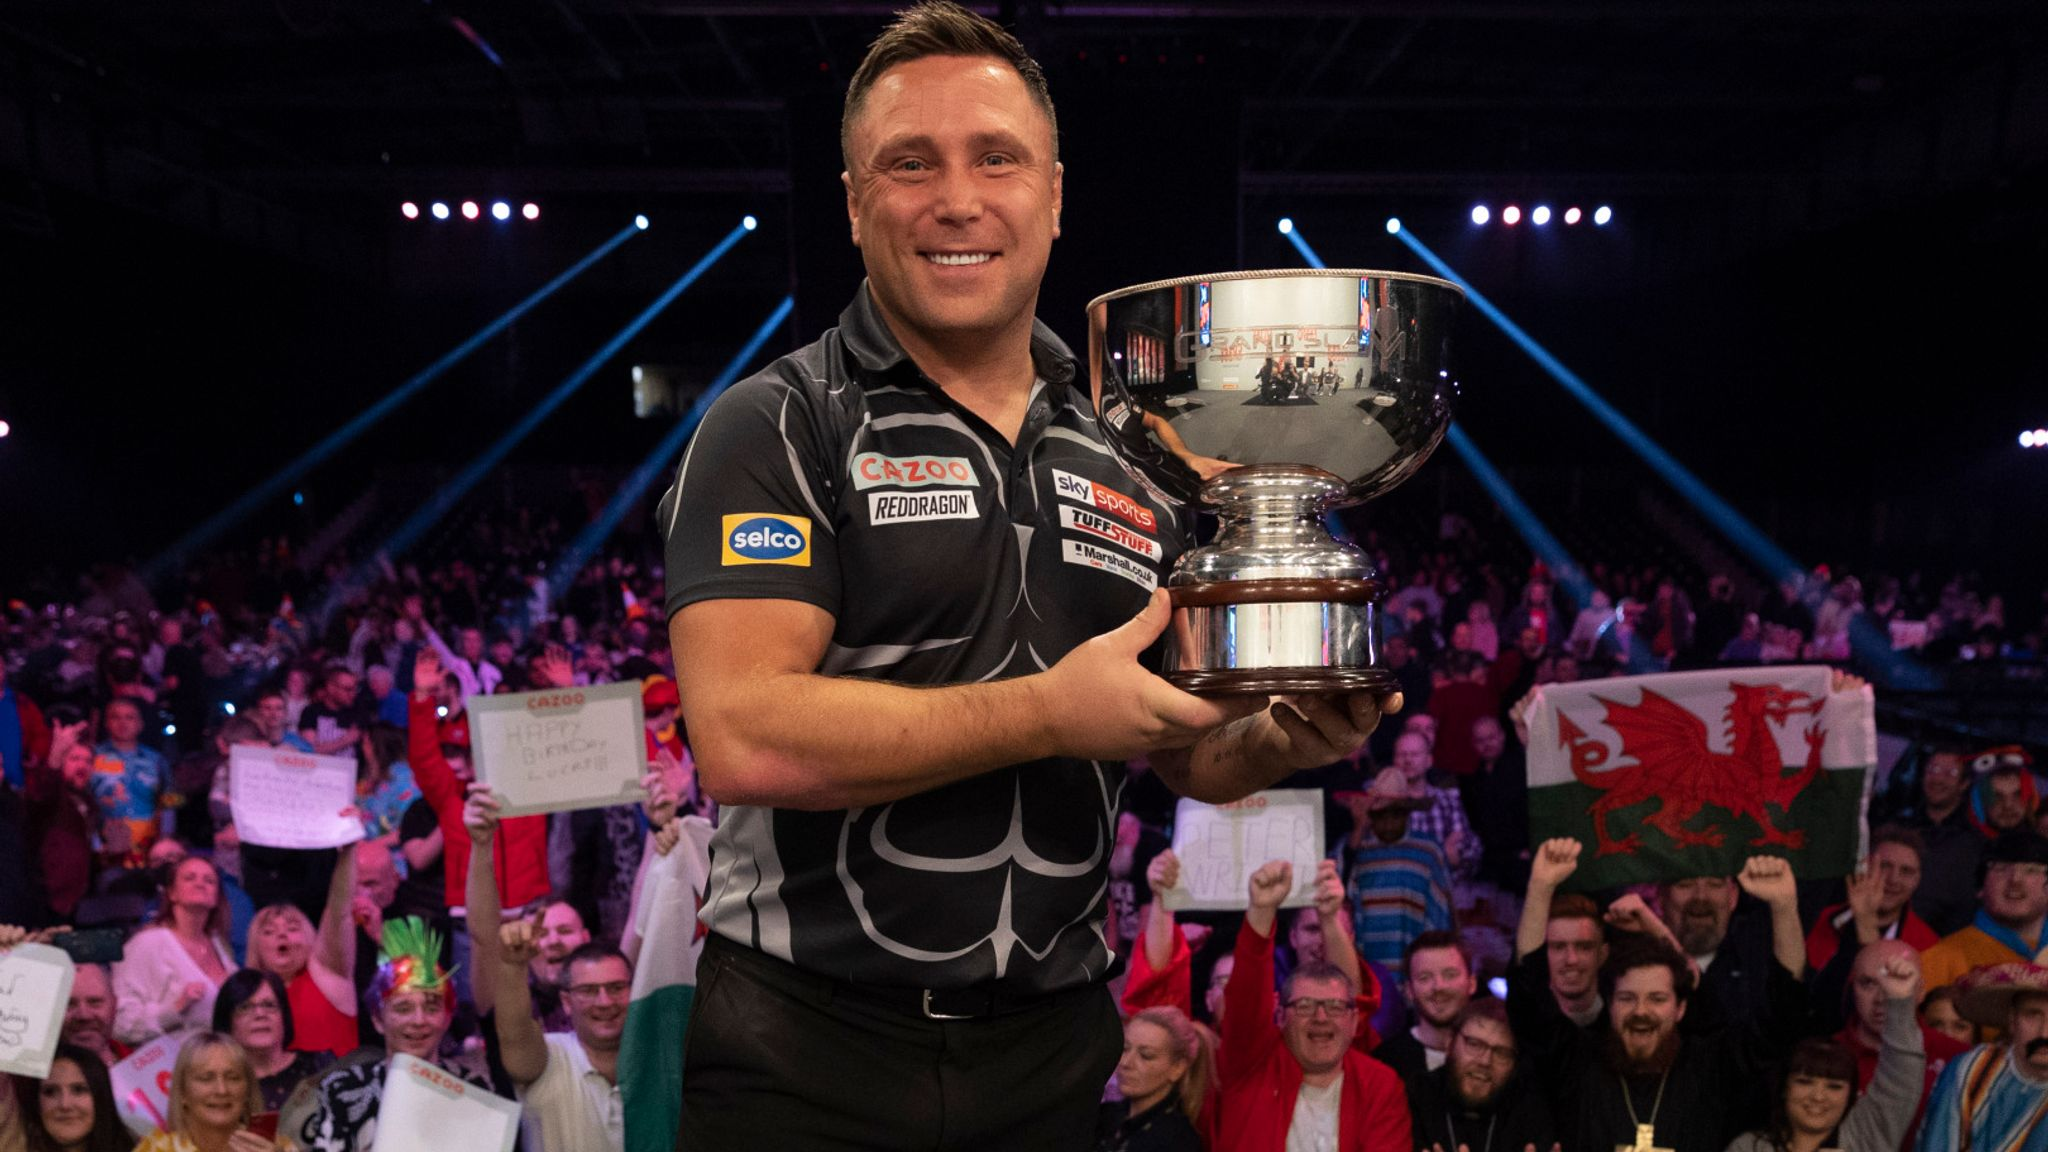 Gerwyn Price poses with the 2021 Grand Slam of Darts trophy